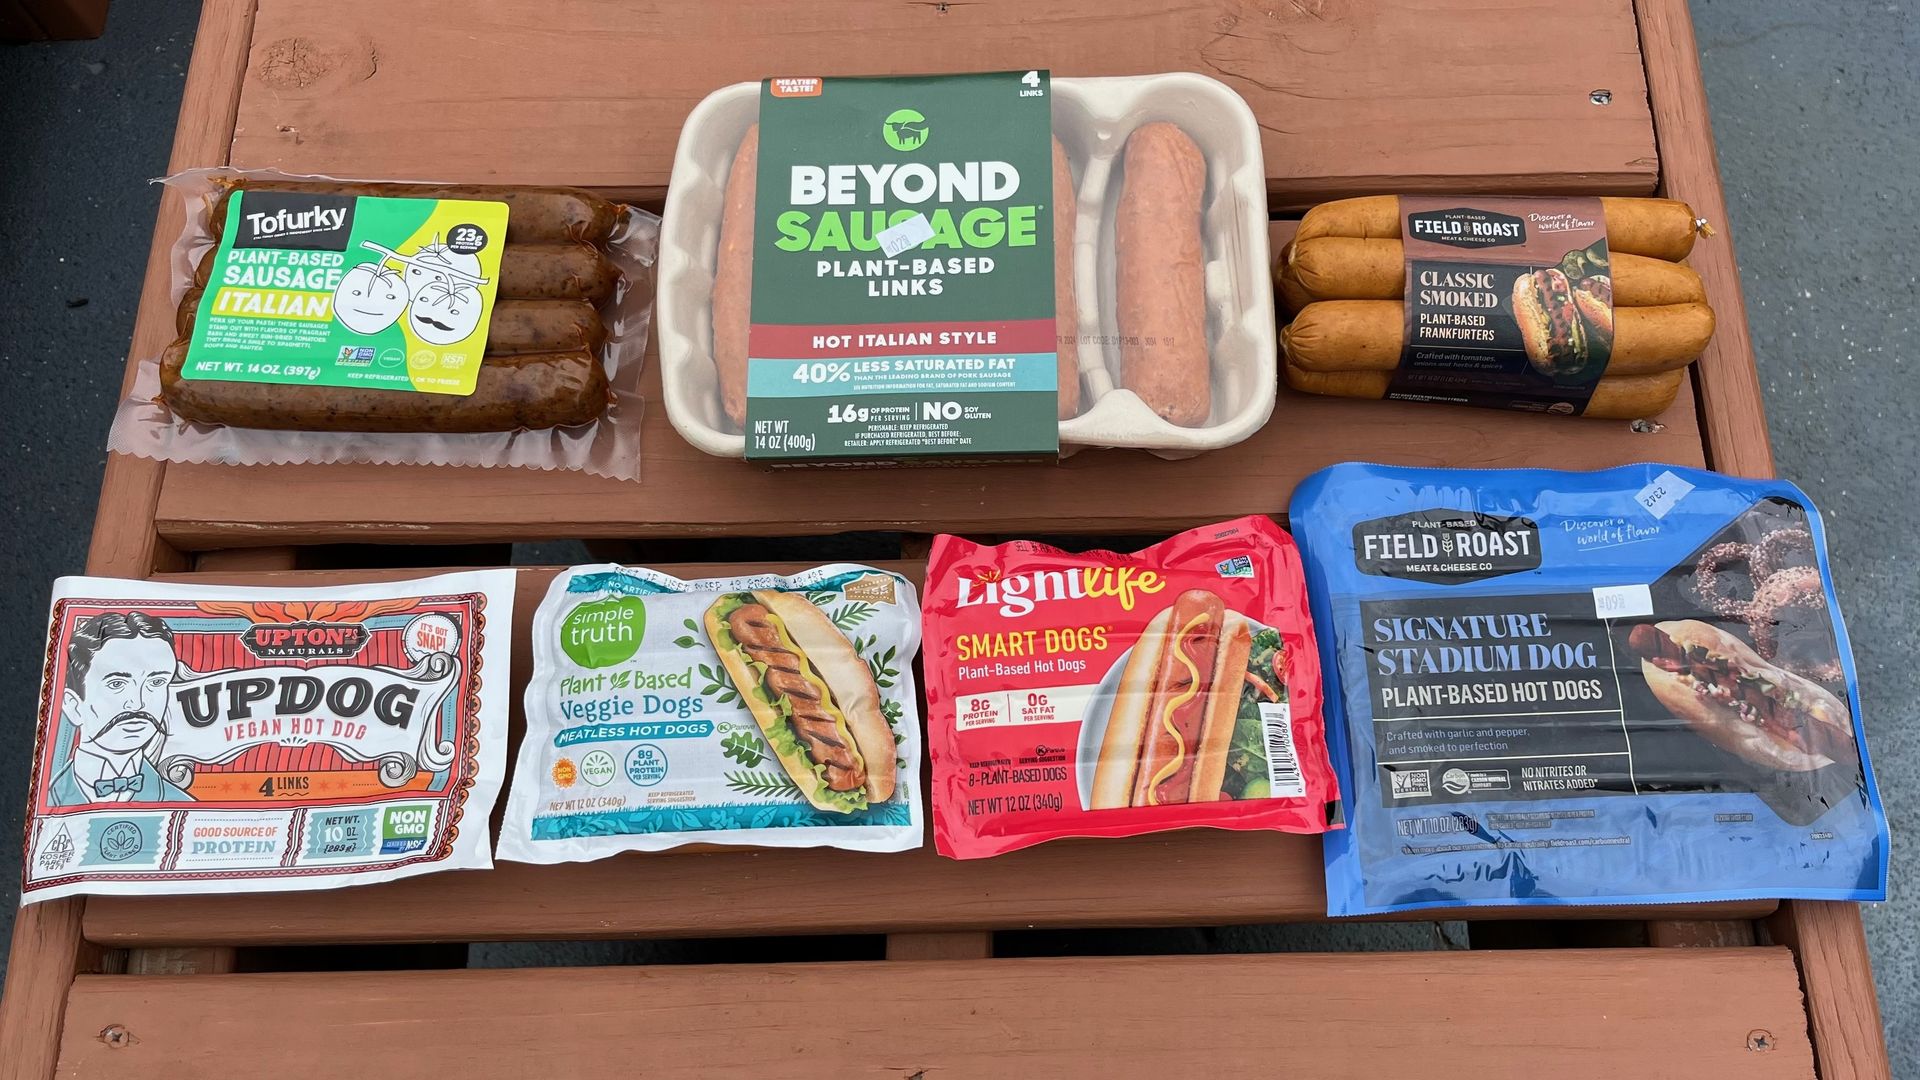 Packages of meat-free hot dogs arranged on a table